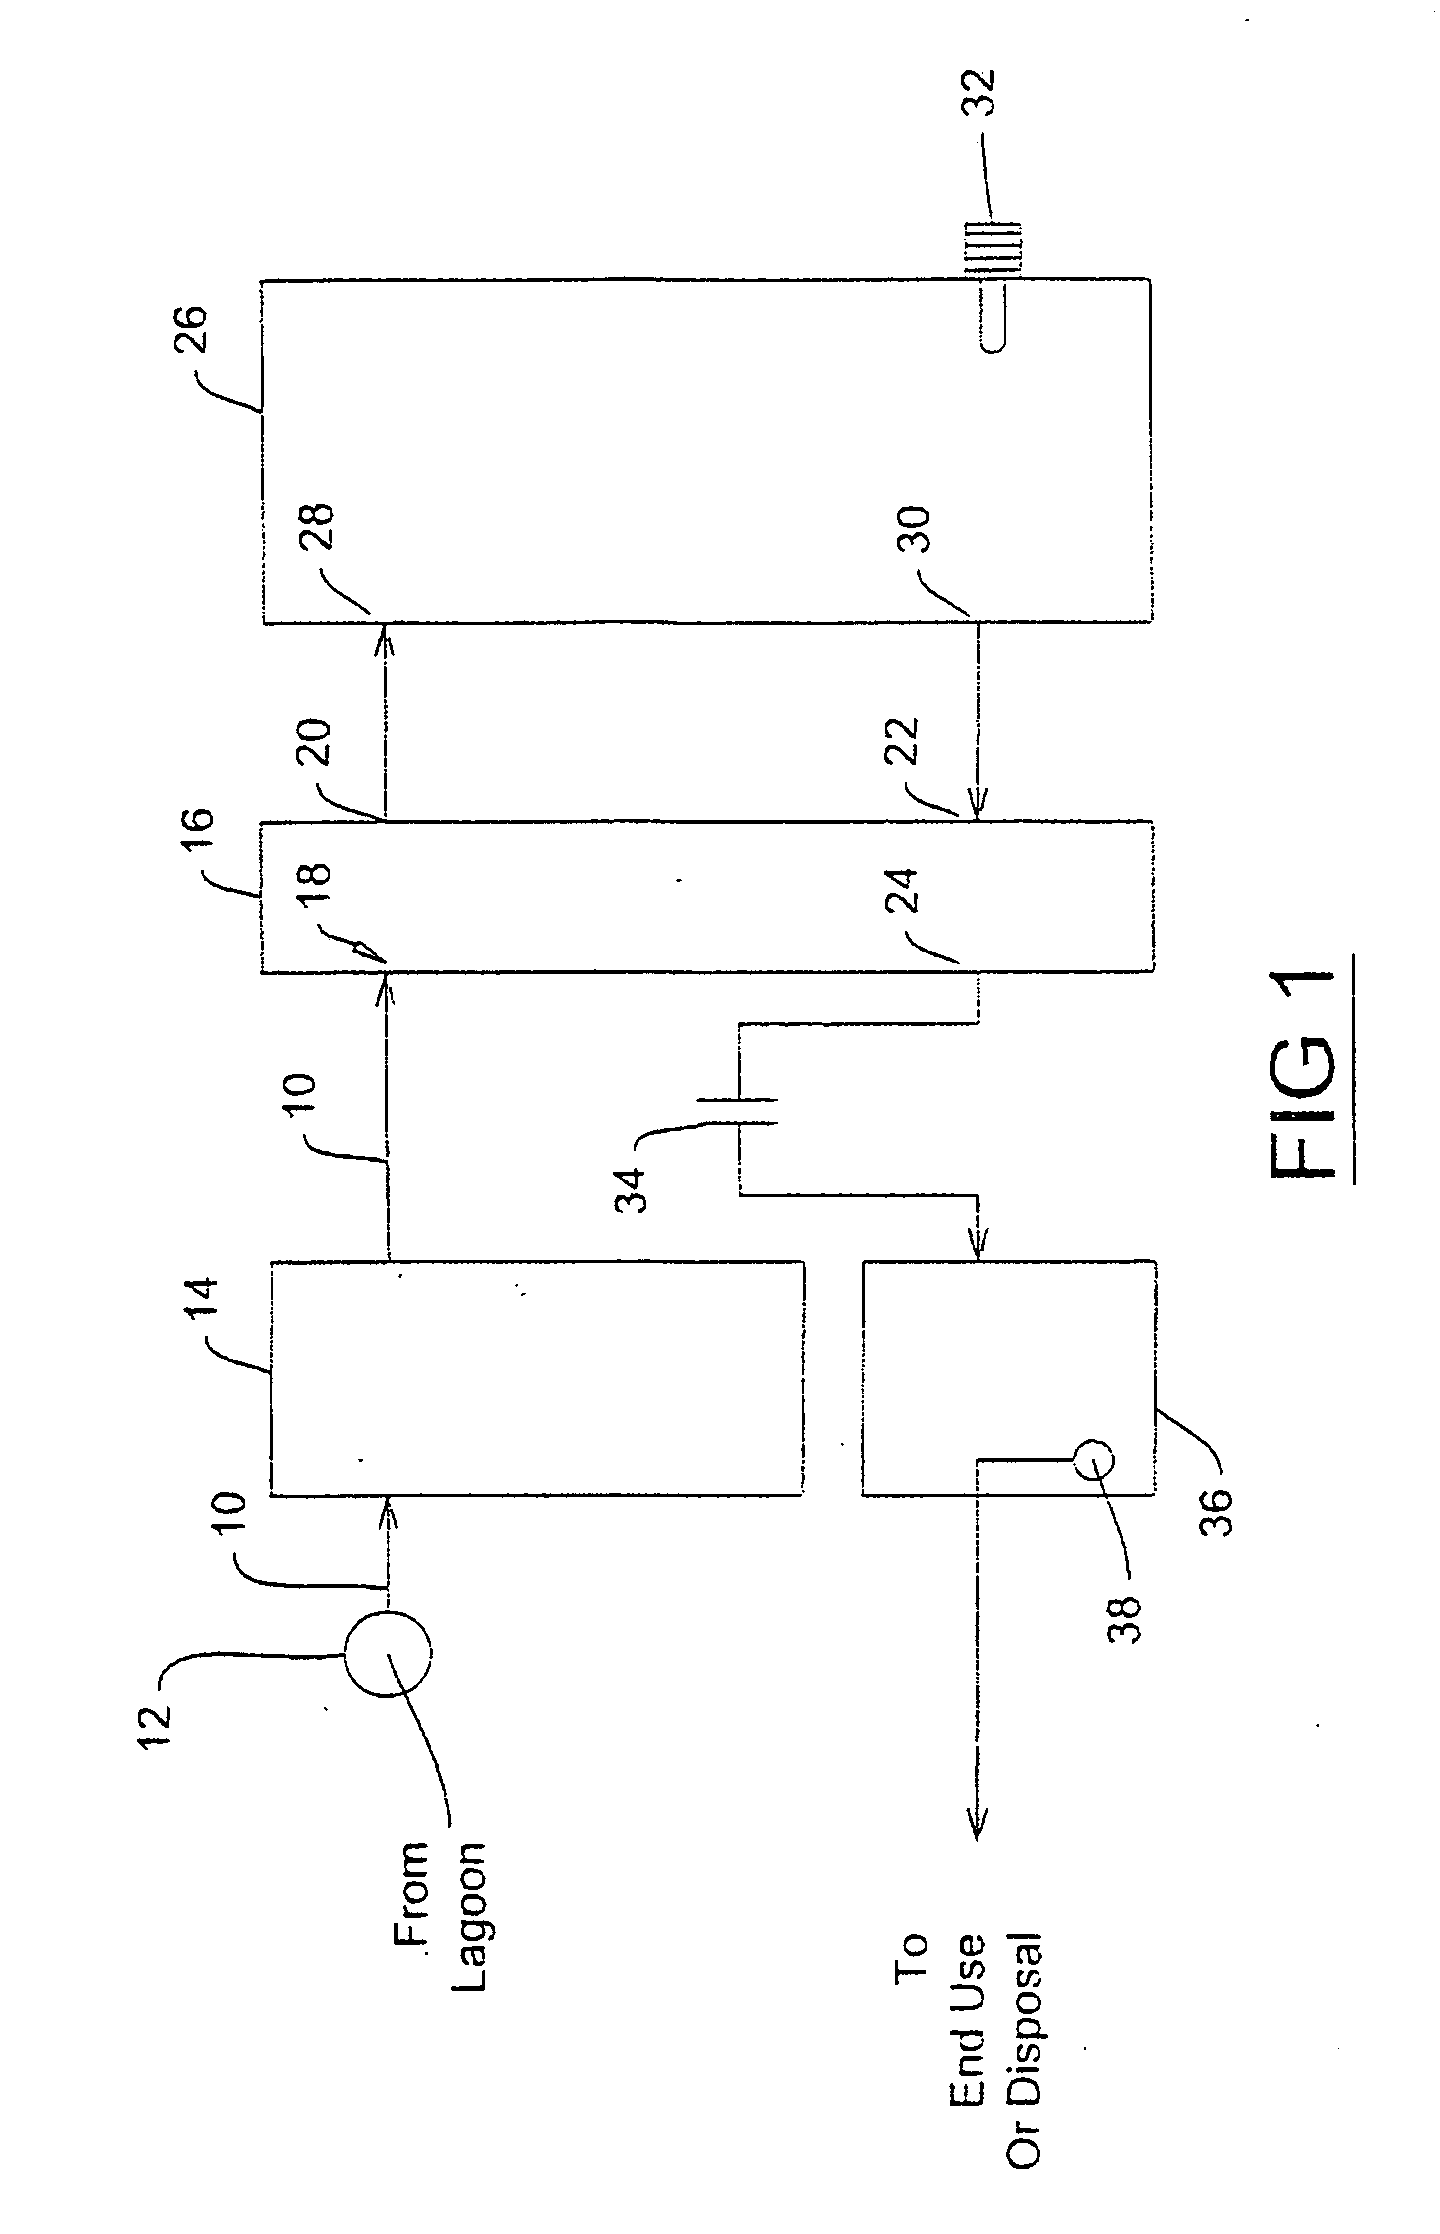 Fluid treatment process and apparatus